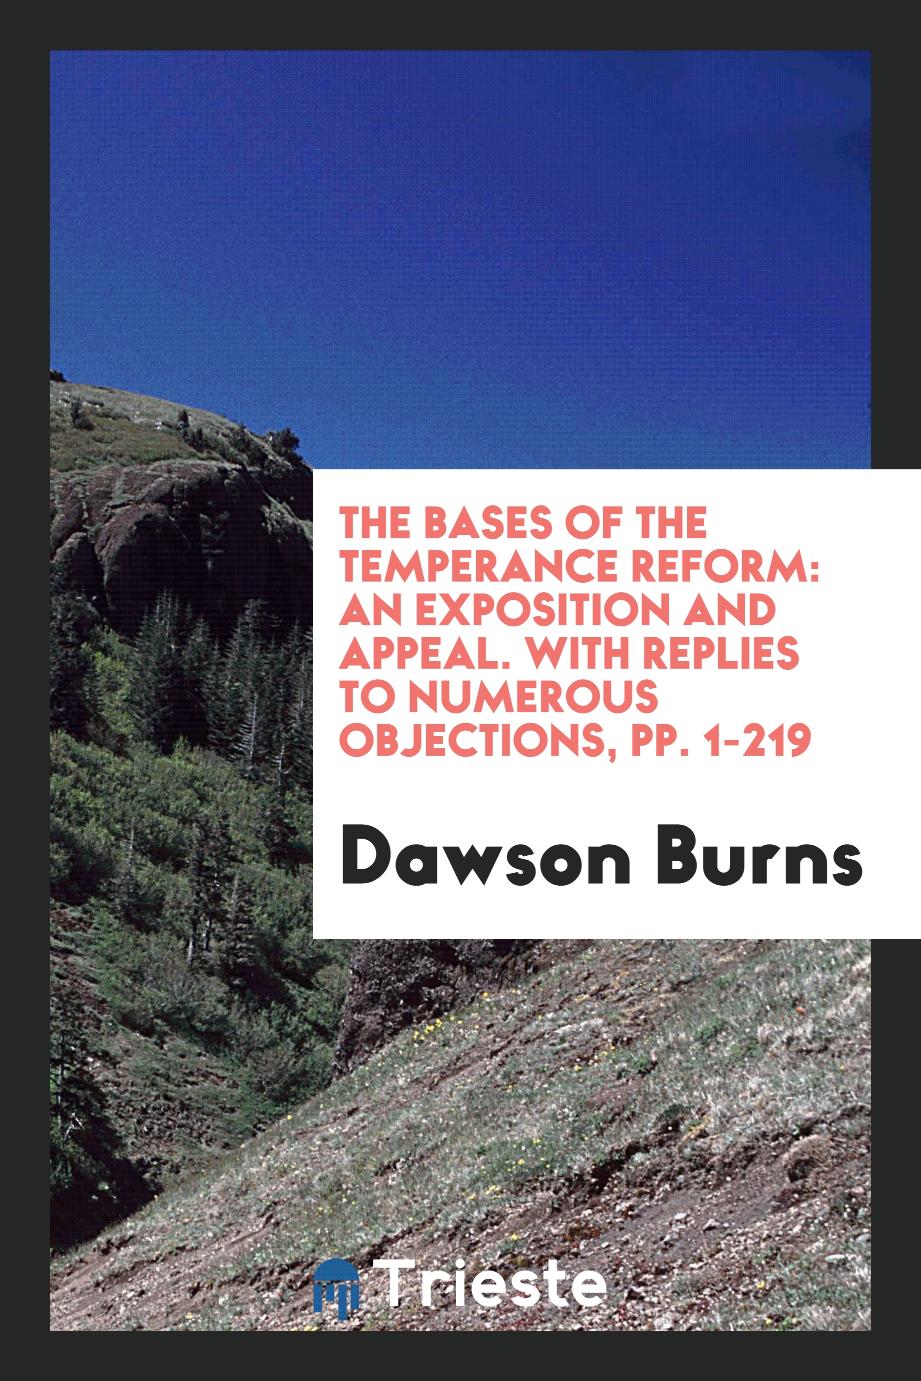 The Bases of the Temperance Reform: An Exposition and Appeal. With Replies to Numerous Objections, pp. 1-219